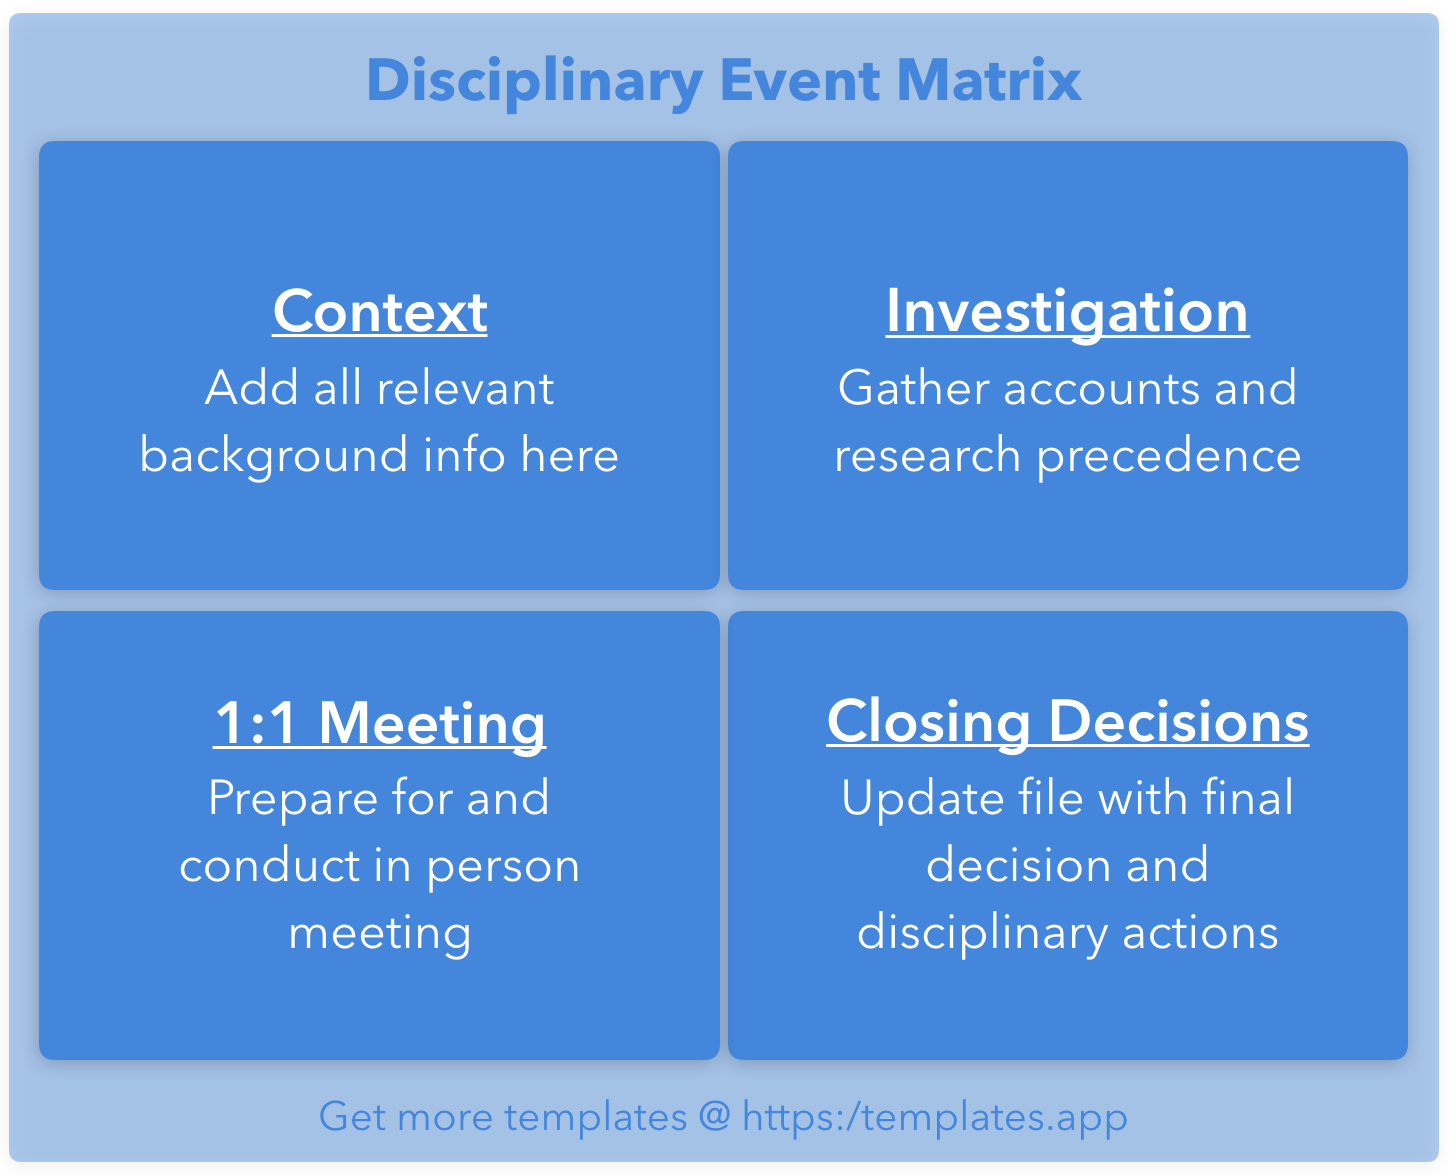 Disciplinary Event Report by templates.app